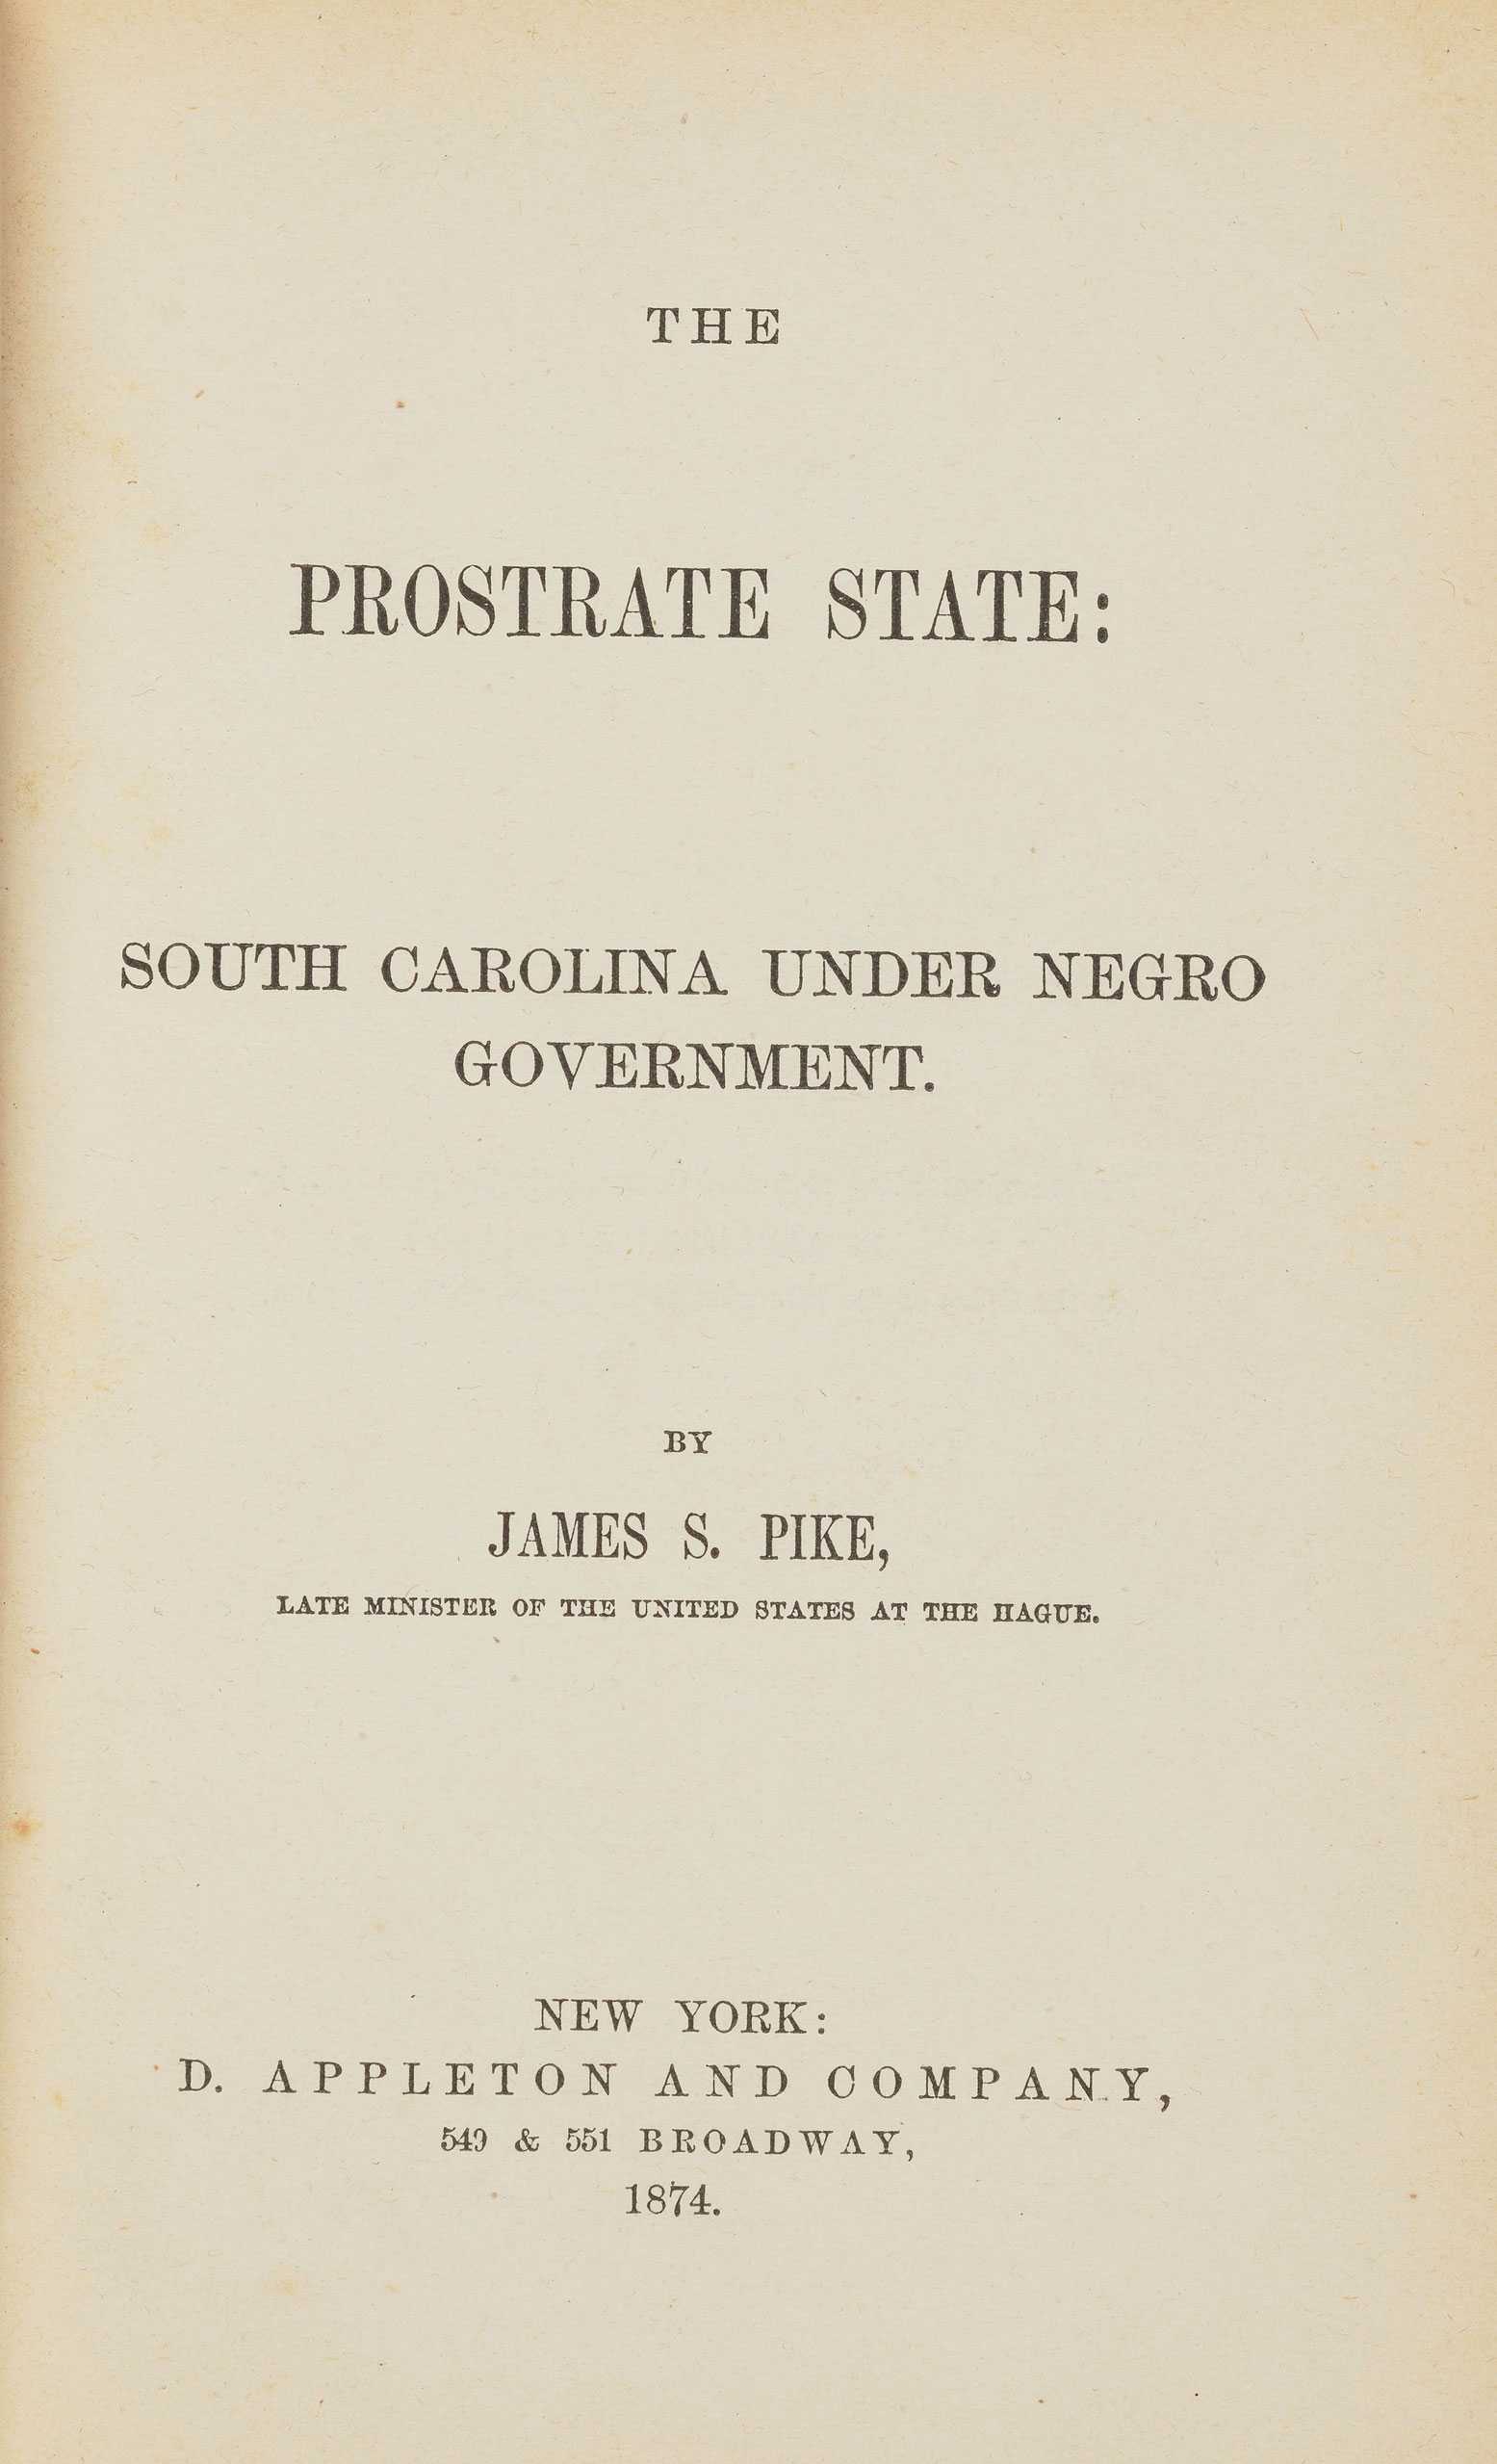 The title page of The Prostrate State: South Carolina Under Negro Government. By James S. Pike.